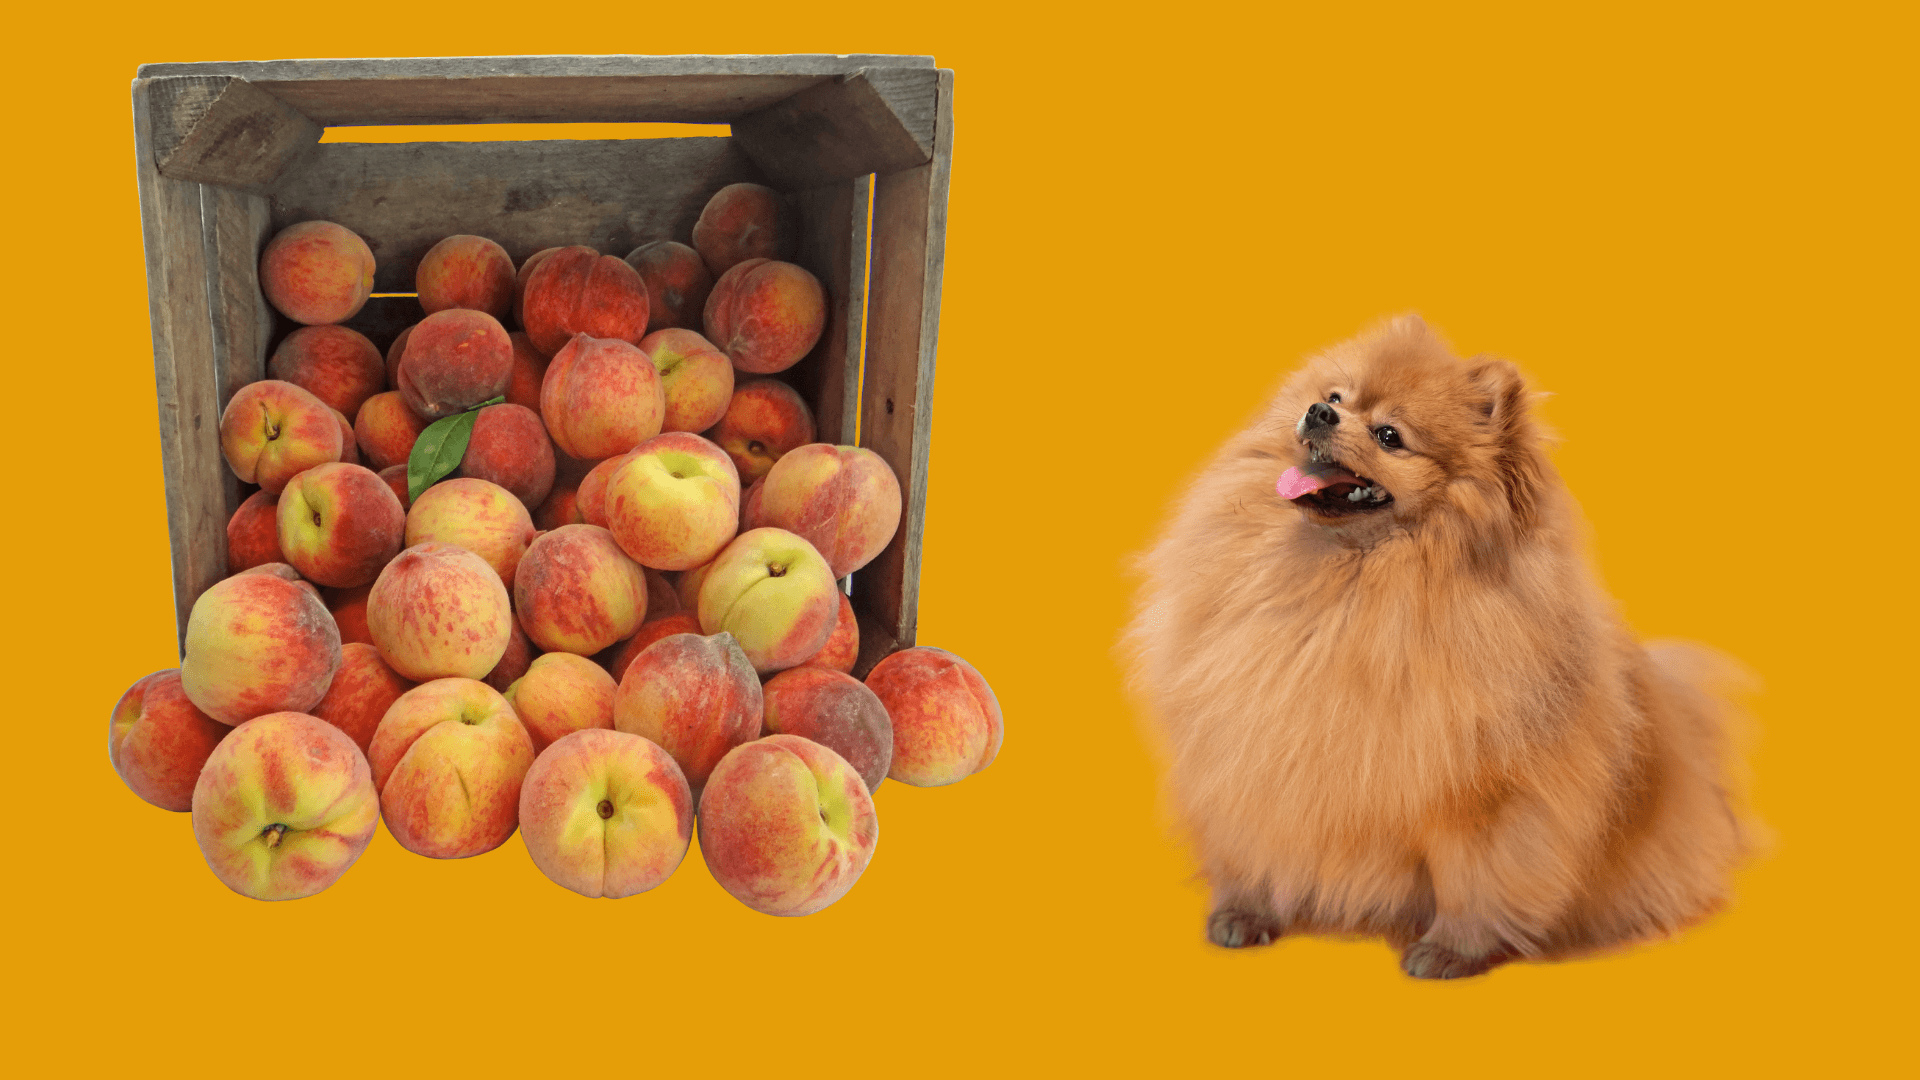 Things to Consider When Sharing Peaches with Your Dog